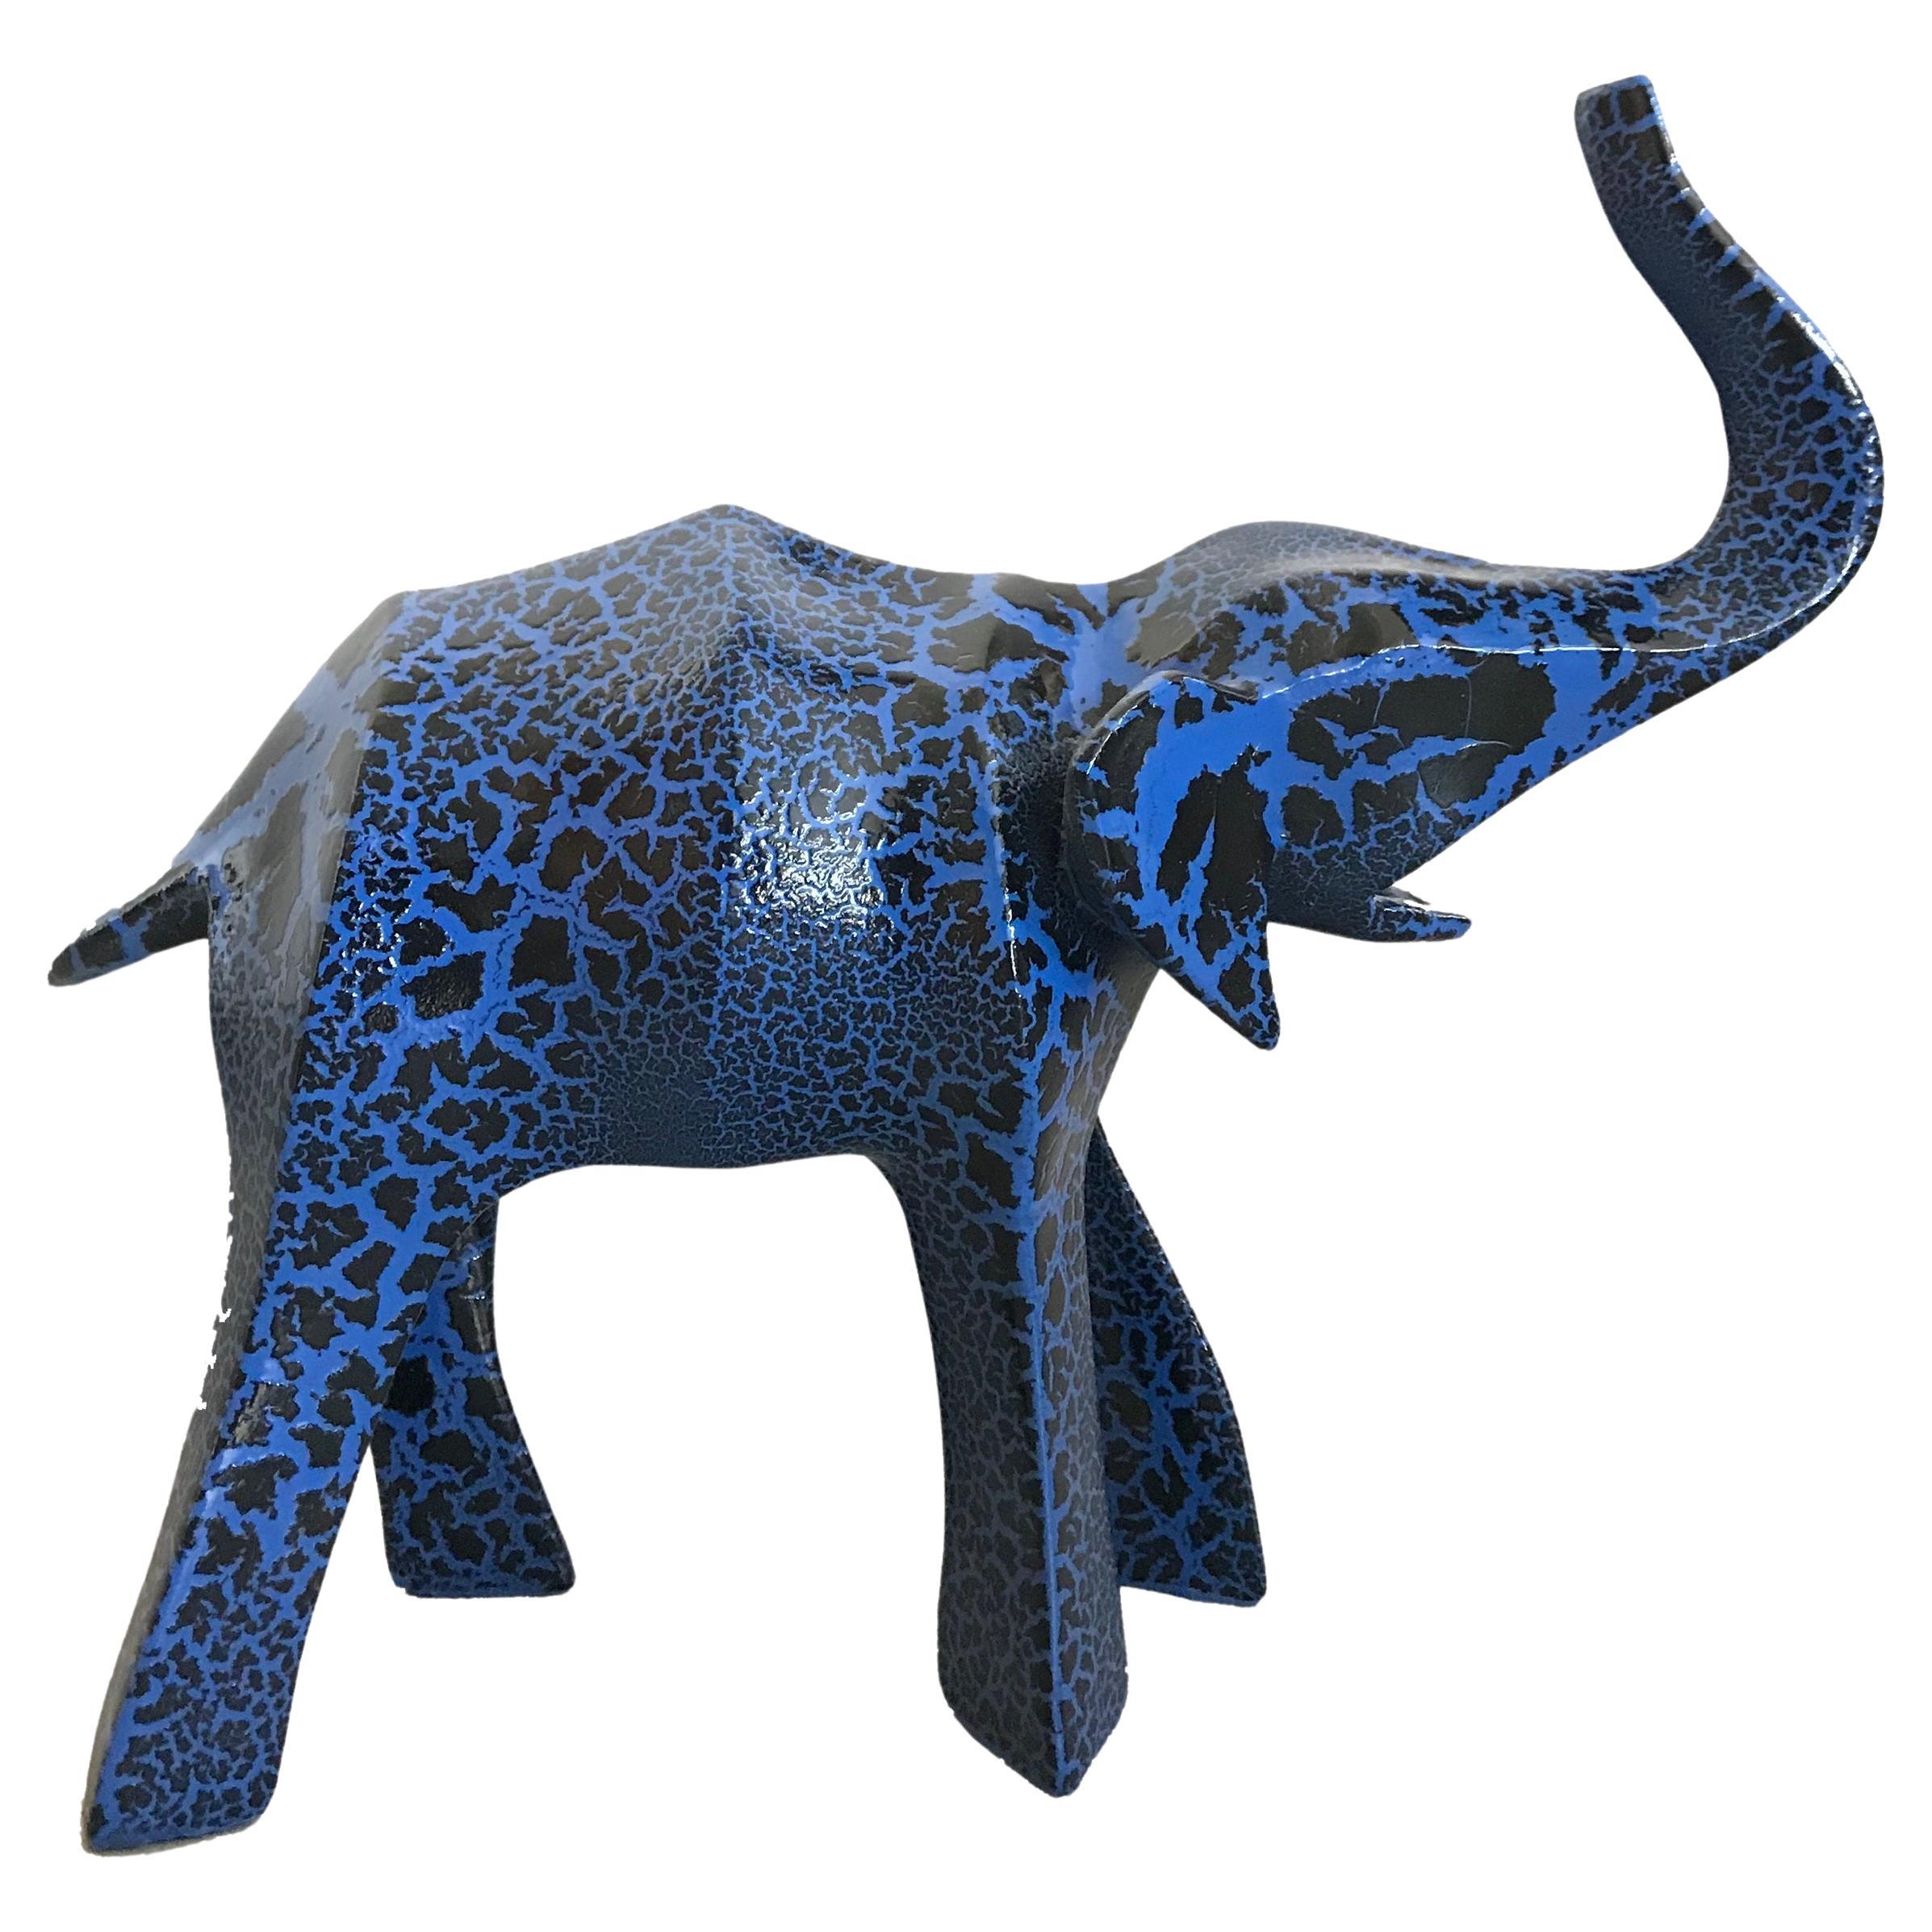 The Fiberglass Crackled Elephant Sculpture by Kunaal Kyhaan is part of a collection of sculptures that are inspired by Indian mythology and by exotic animals that are indigenous to India. 
Each animal is hand cast and reinterpreted into